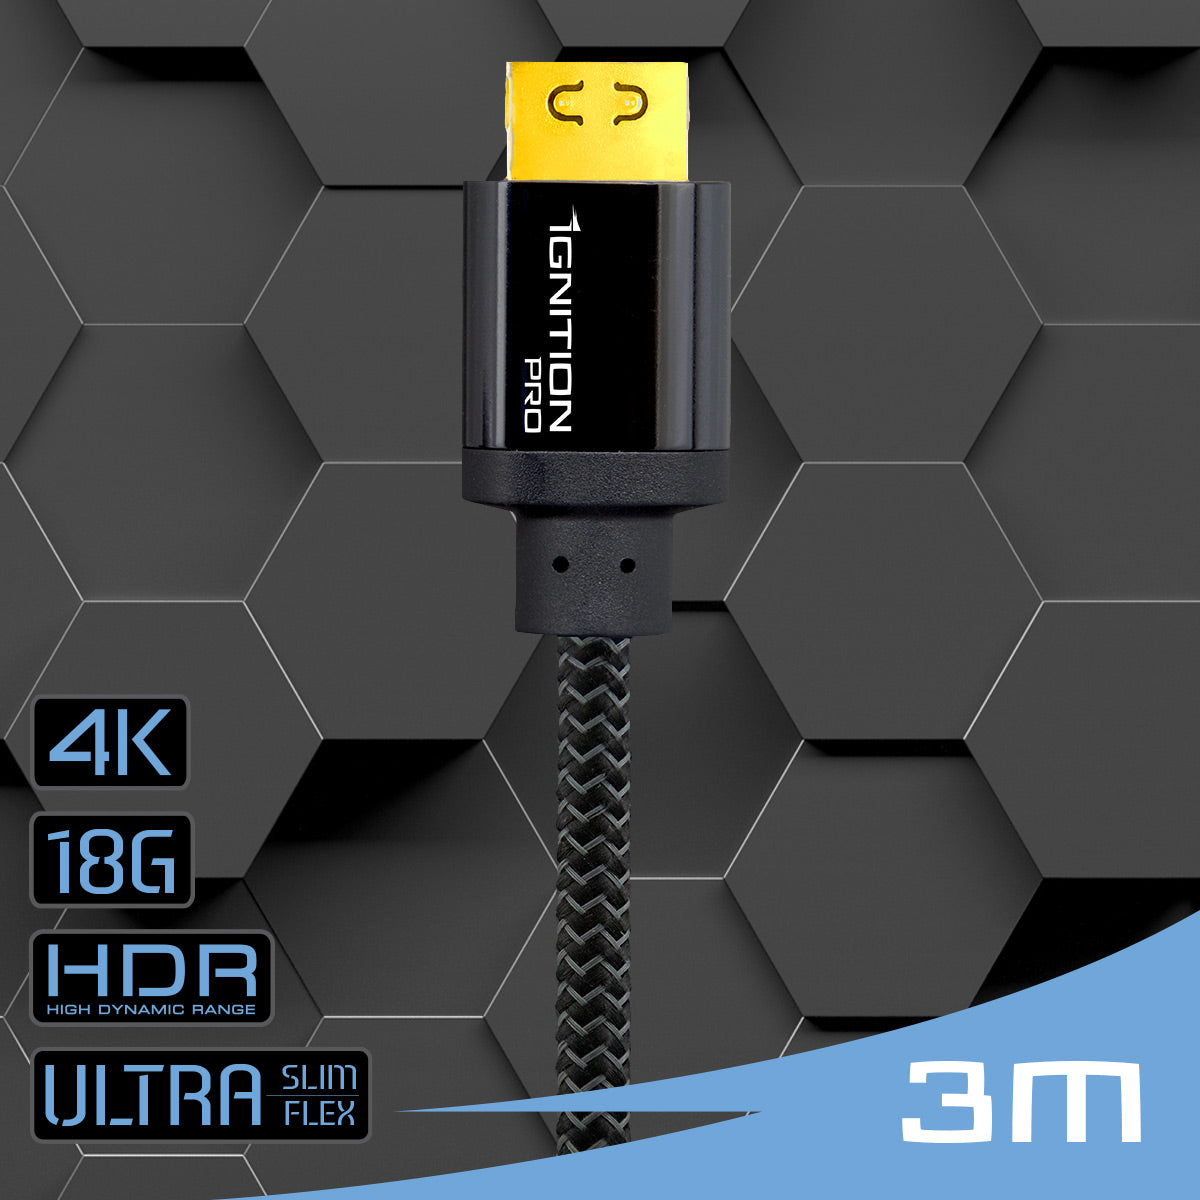 3M Premium High-Speed HDMI Cable (4K@18Gbps)